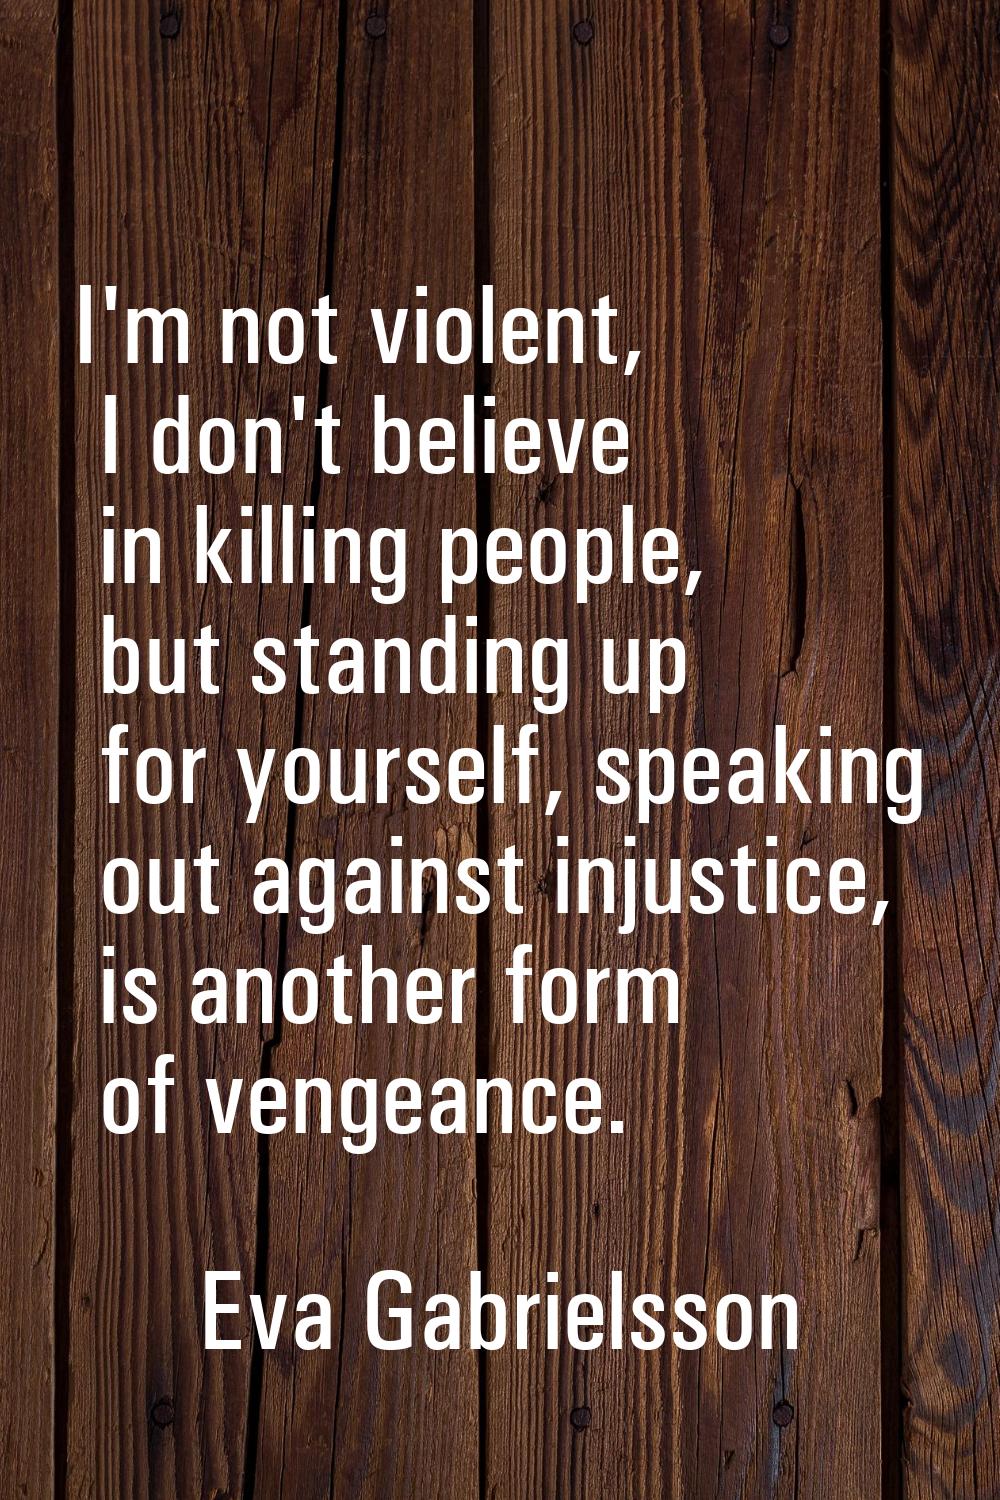 I'm not violent, I don't believe in killing people, but standing up for yourself, speaking out agai